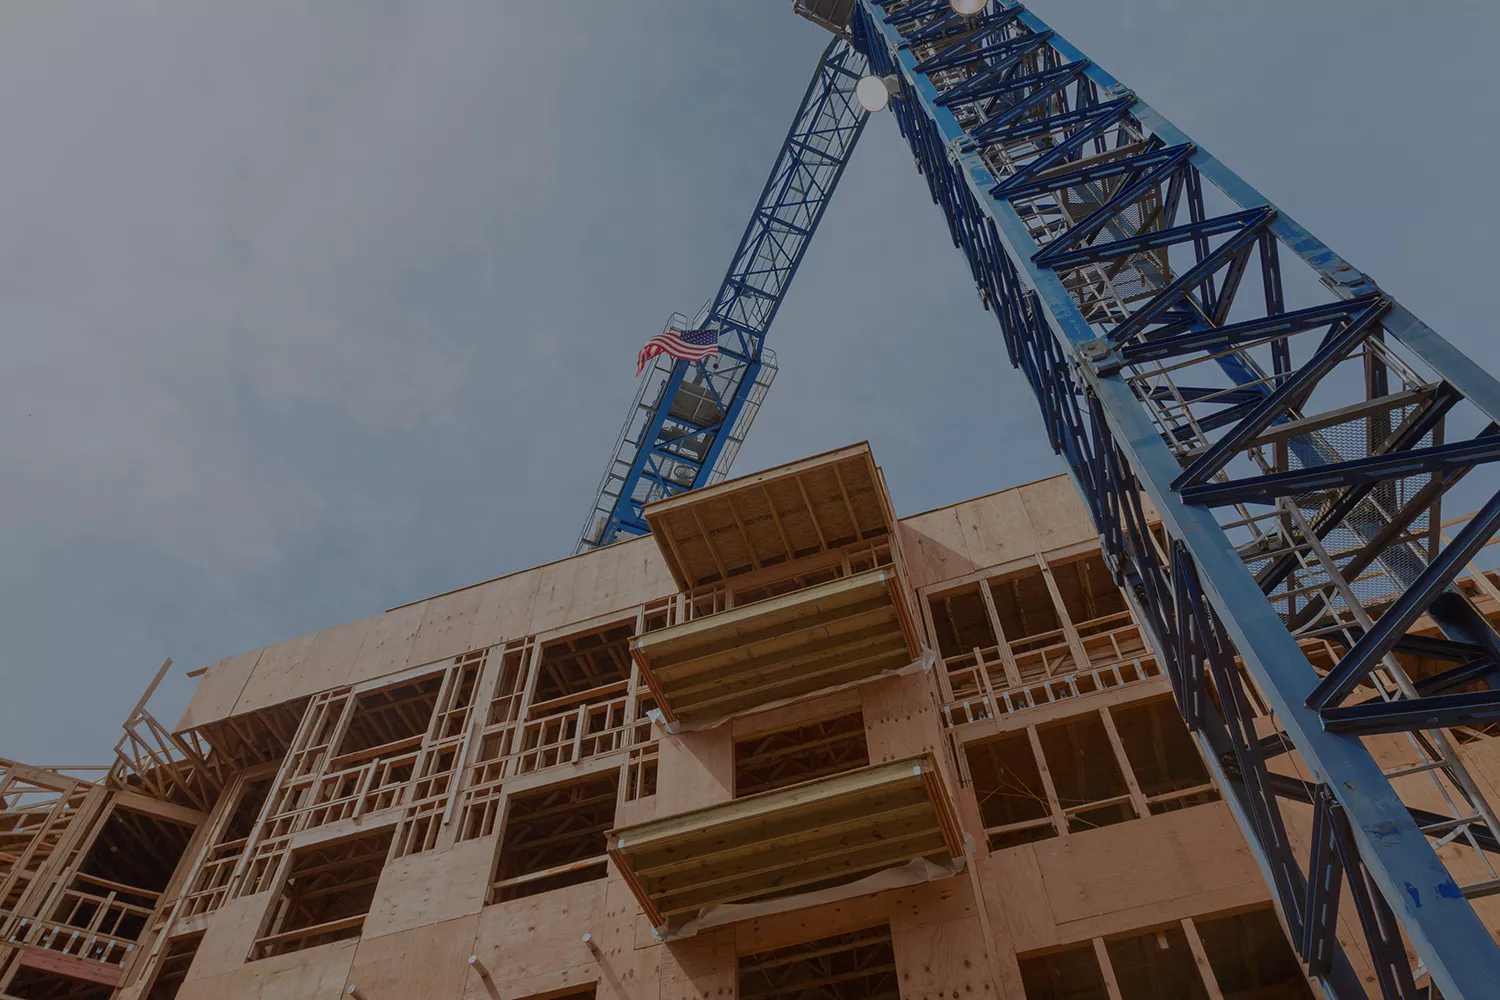 background image of wood framing of an apartment building and a blue crane